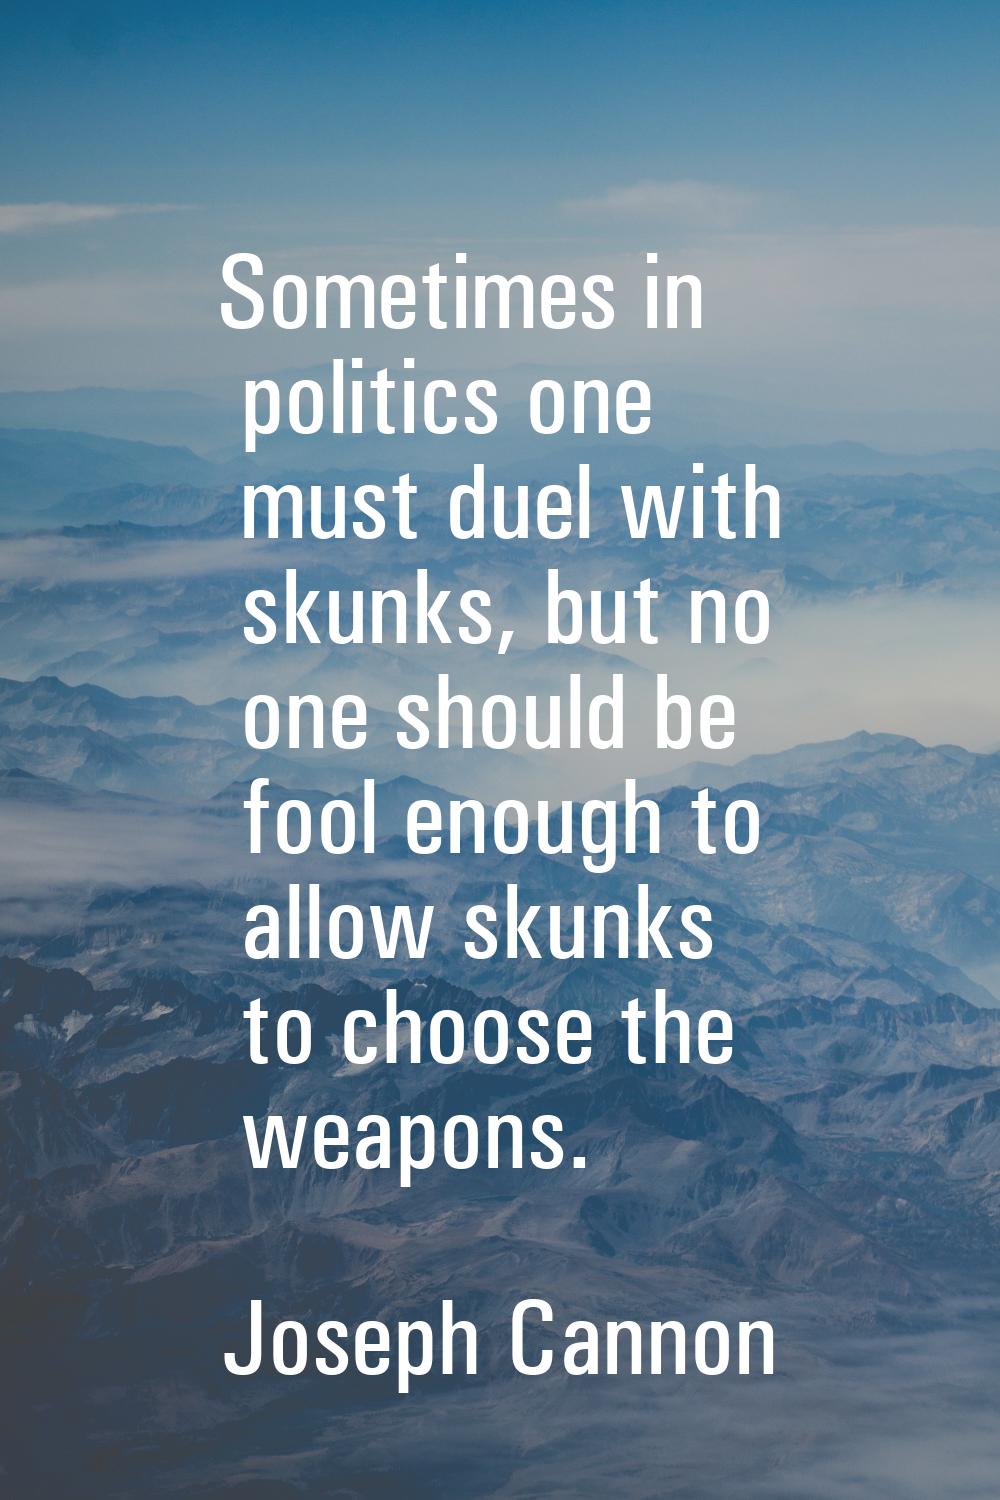 Sometimes in politics one must duel with skunks, but no one should be fool enough to allow skunks t